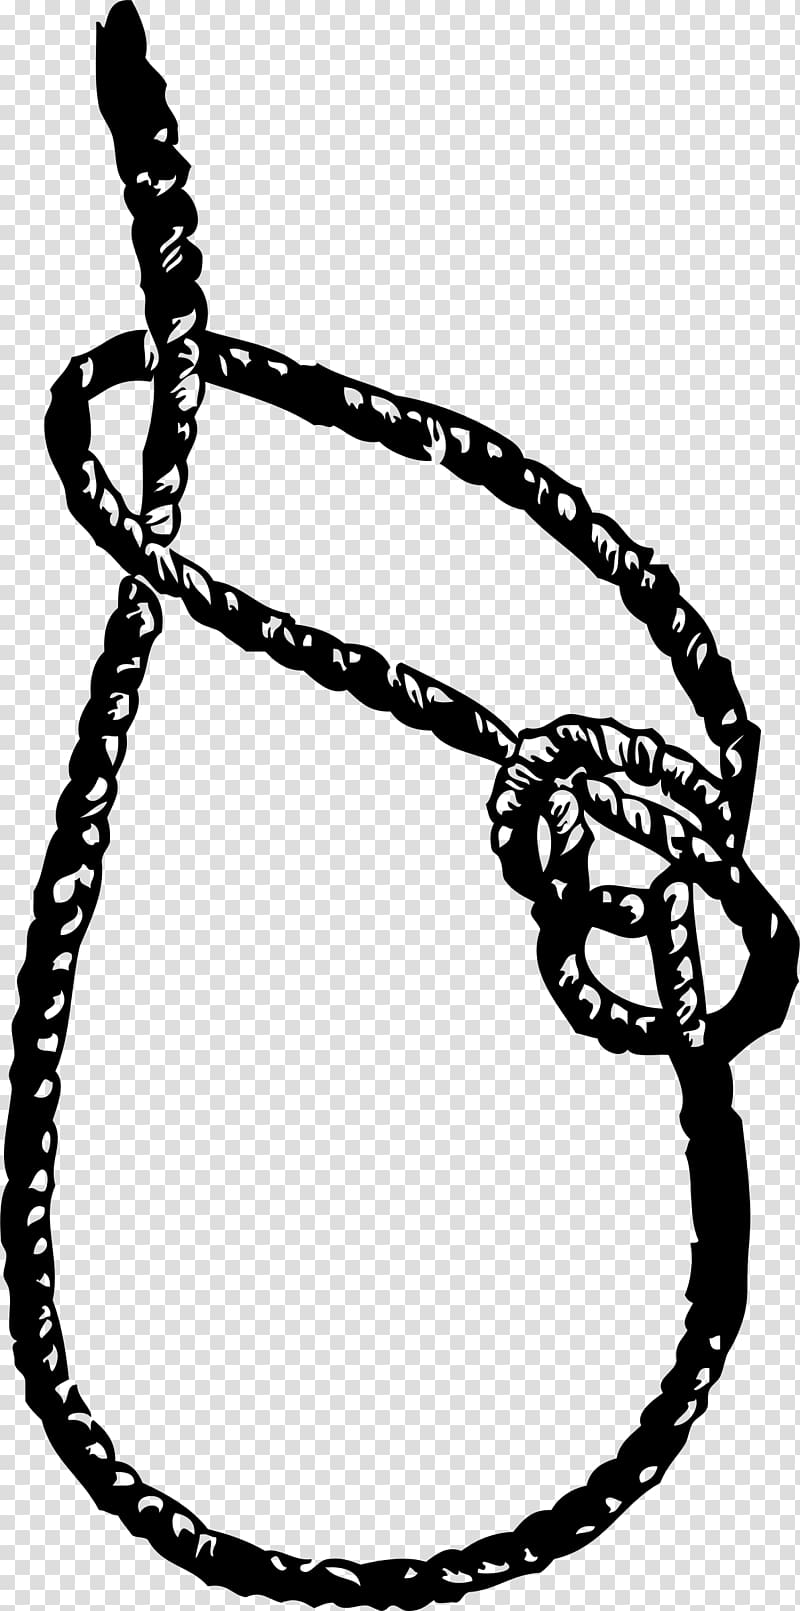 Knot Sailing Rope, rope knot transparent background PNG clipart